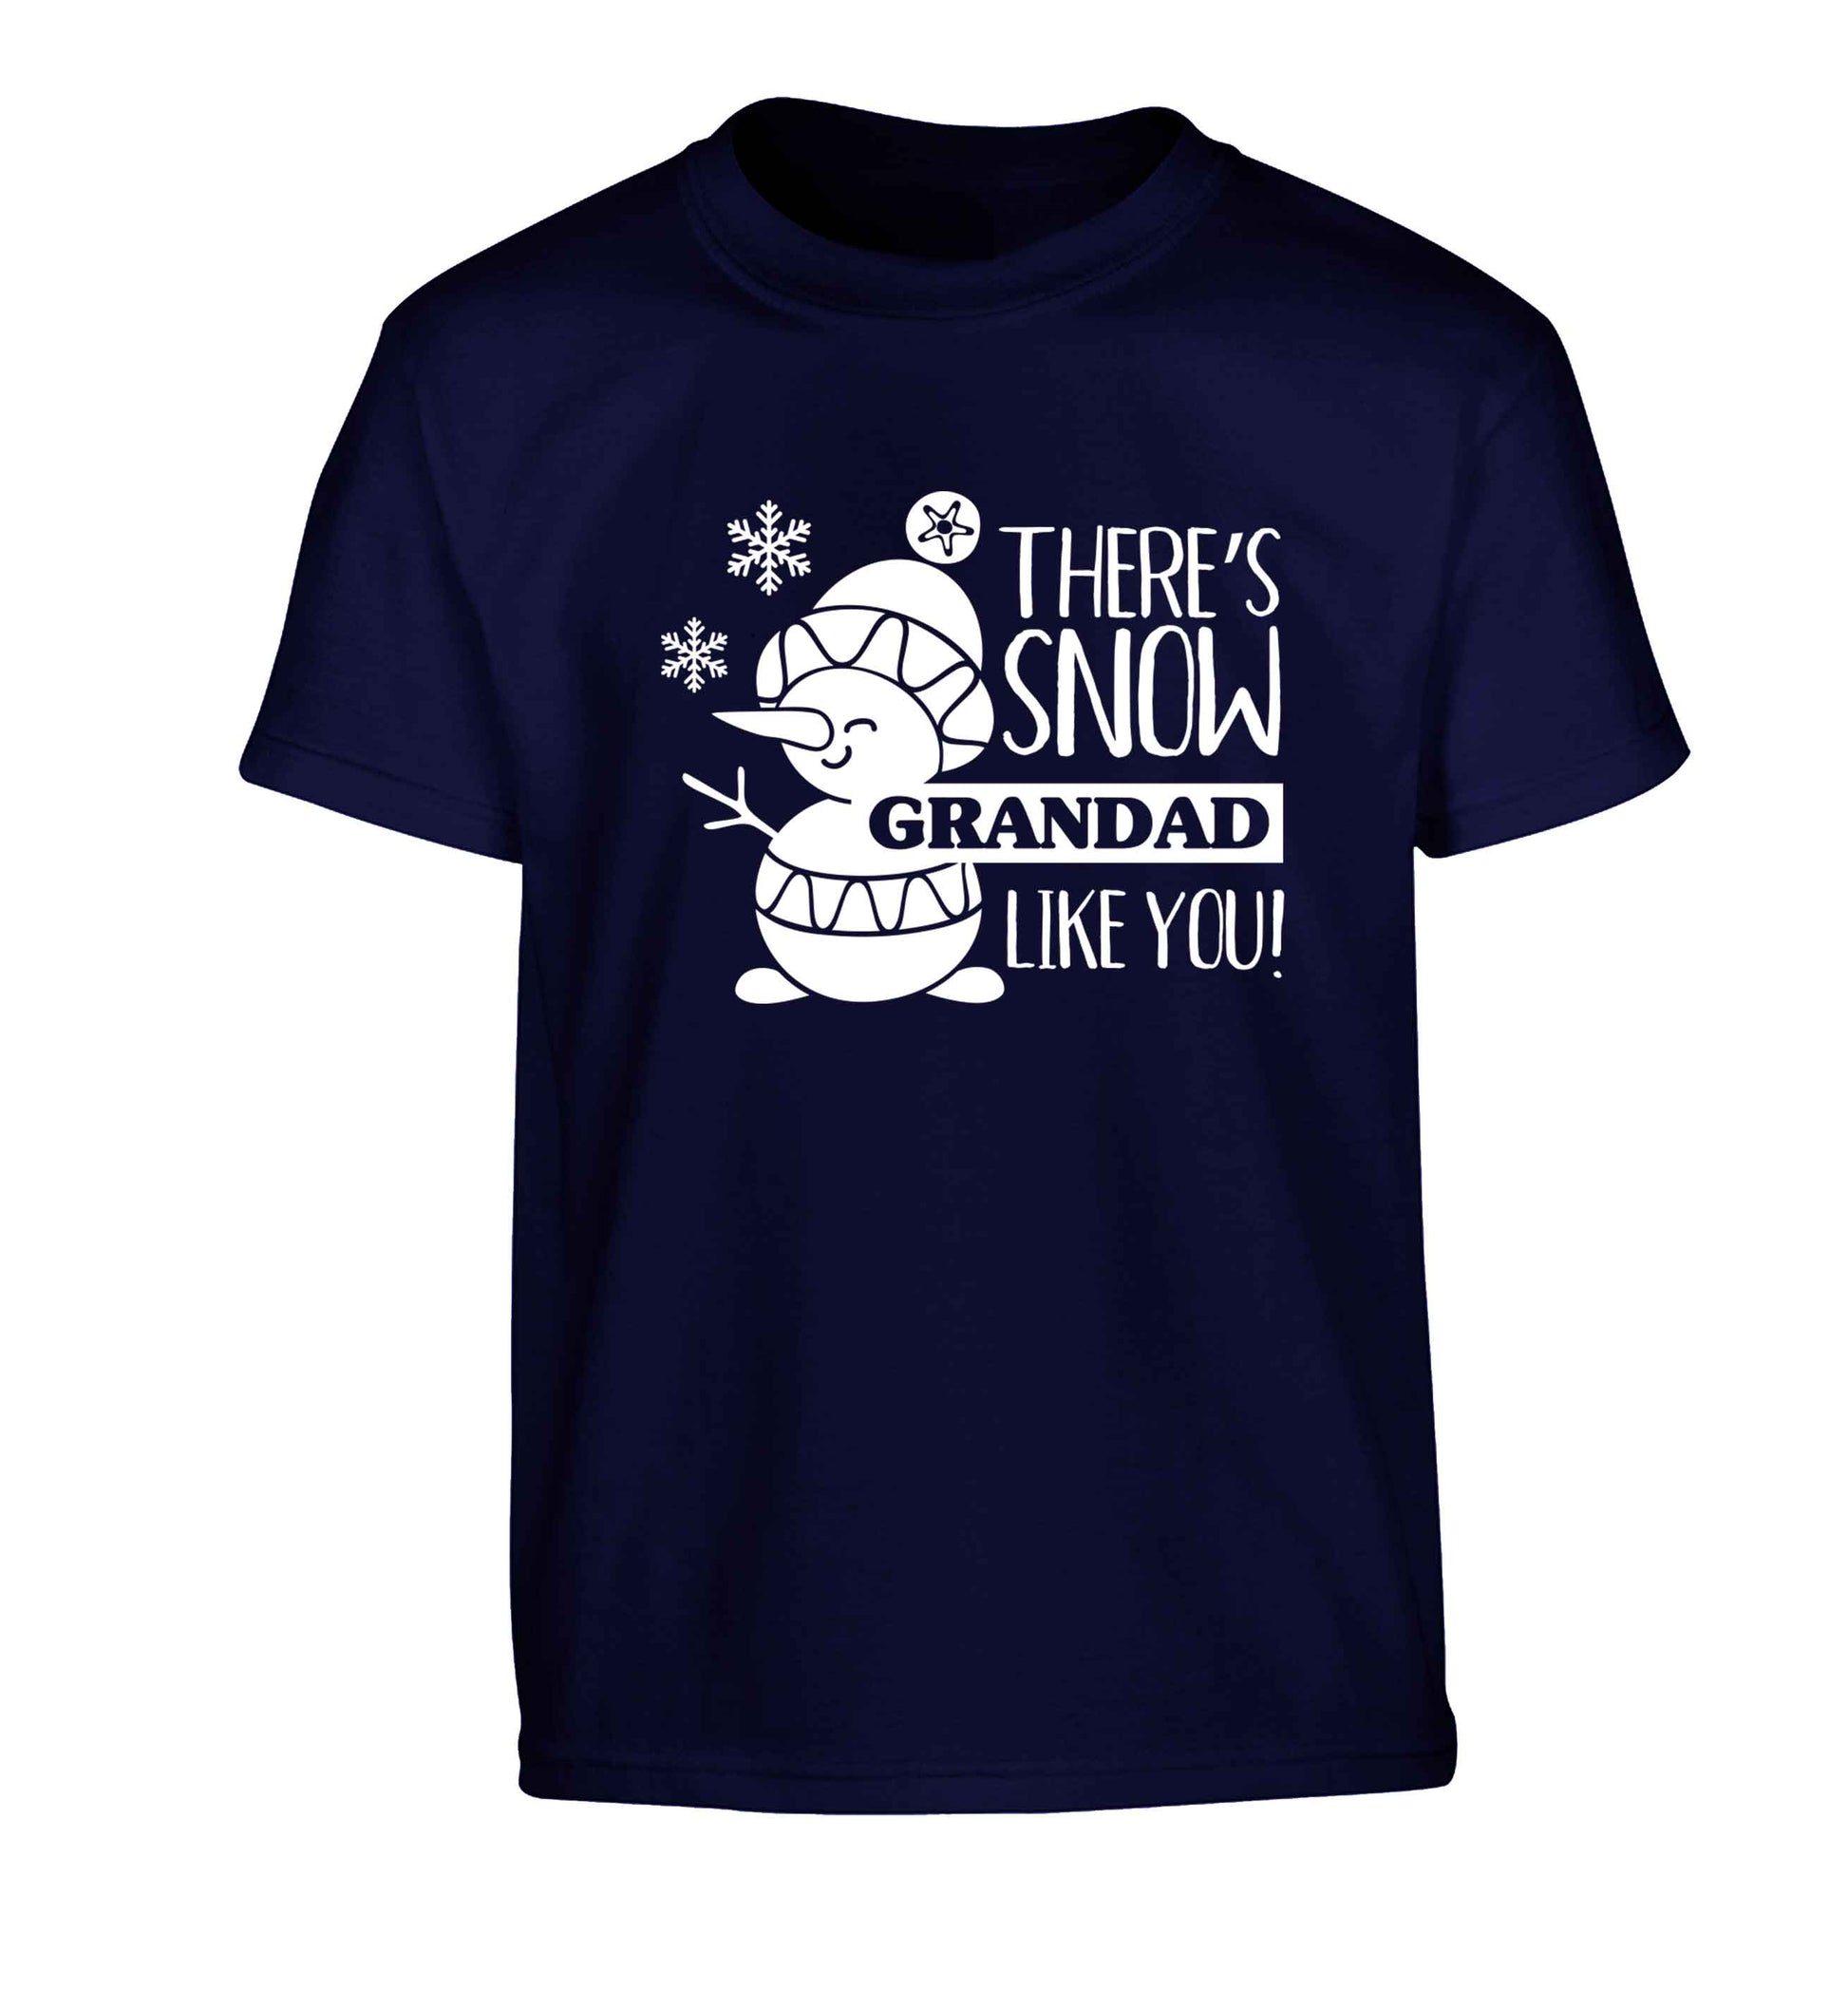 There's snow grandad like you Children's navy Tshirt 12-13 Years